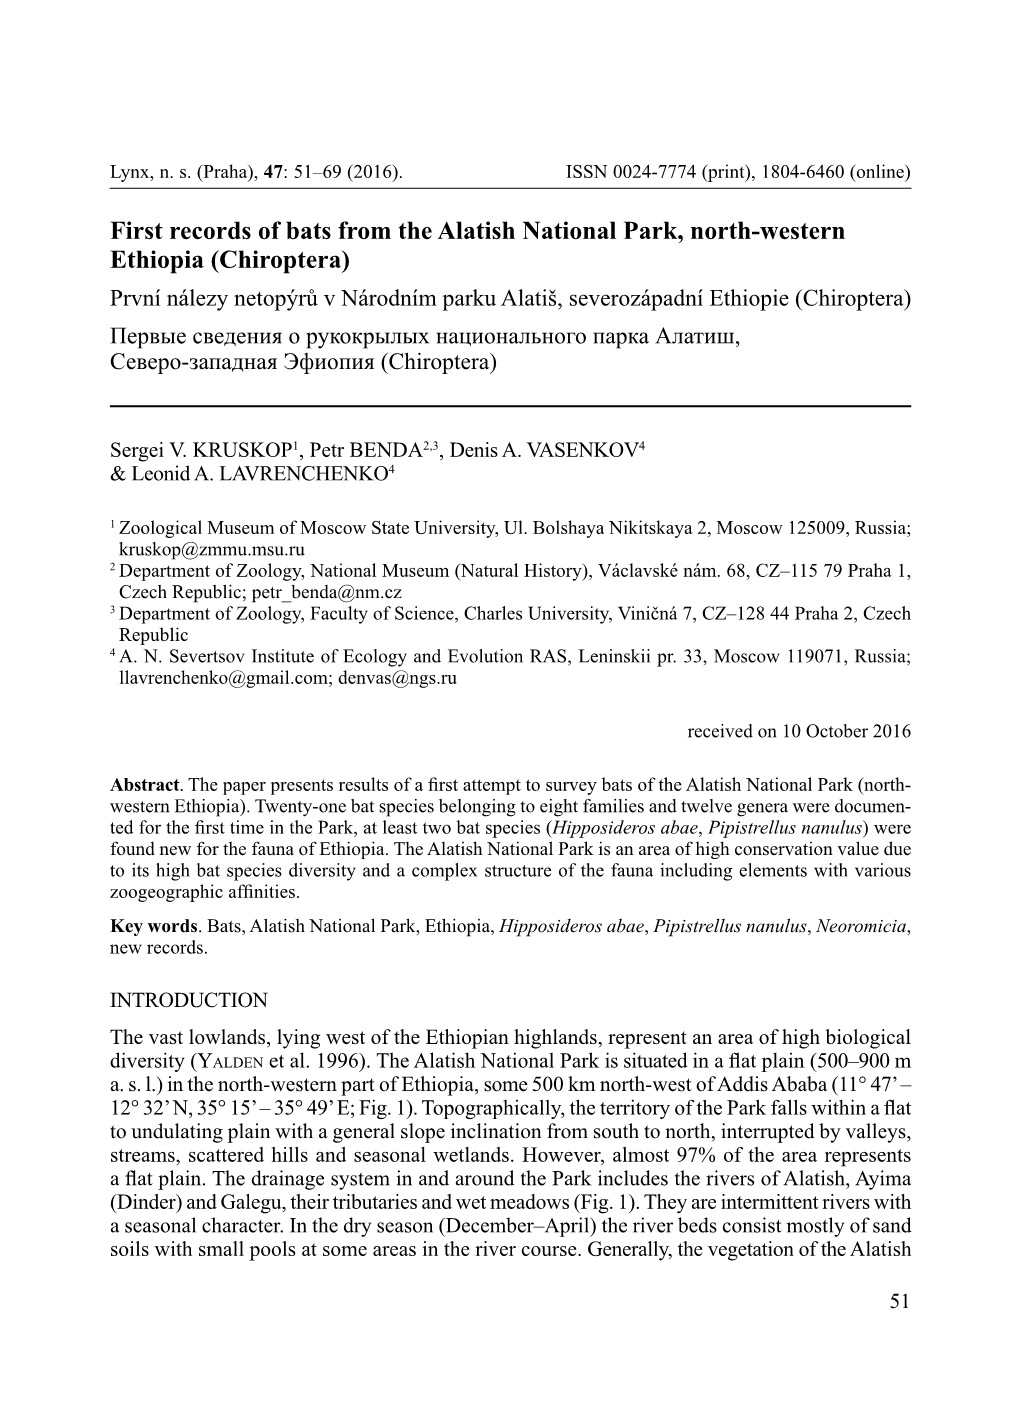 First Records of Bats from the Alatish National Park, North-Western Ethiopia